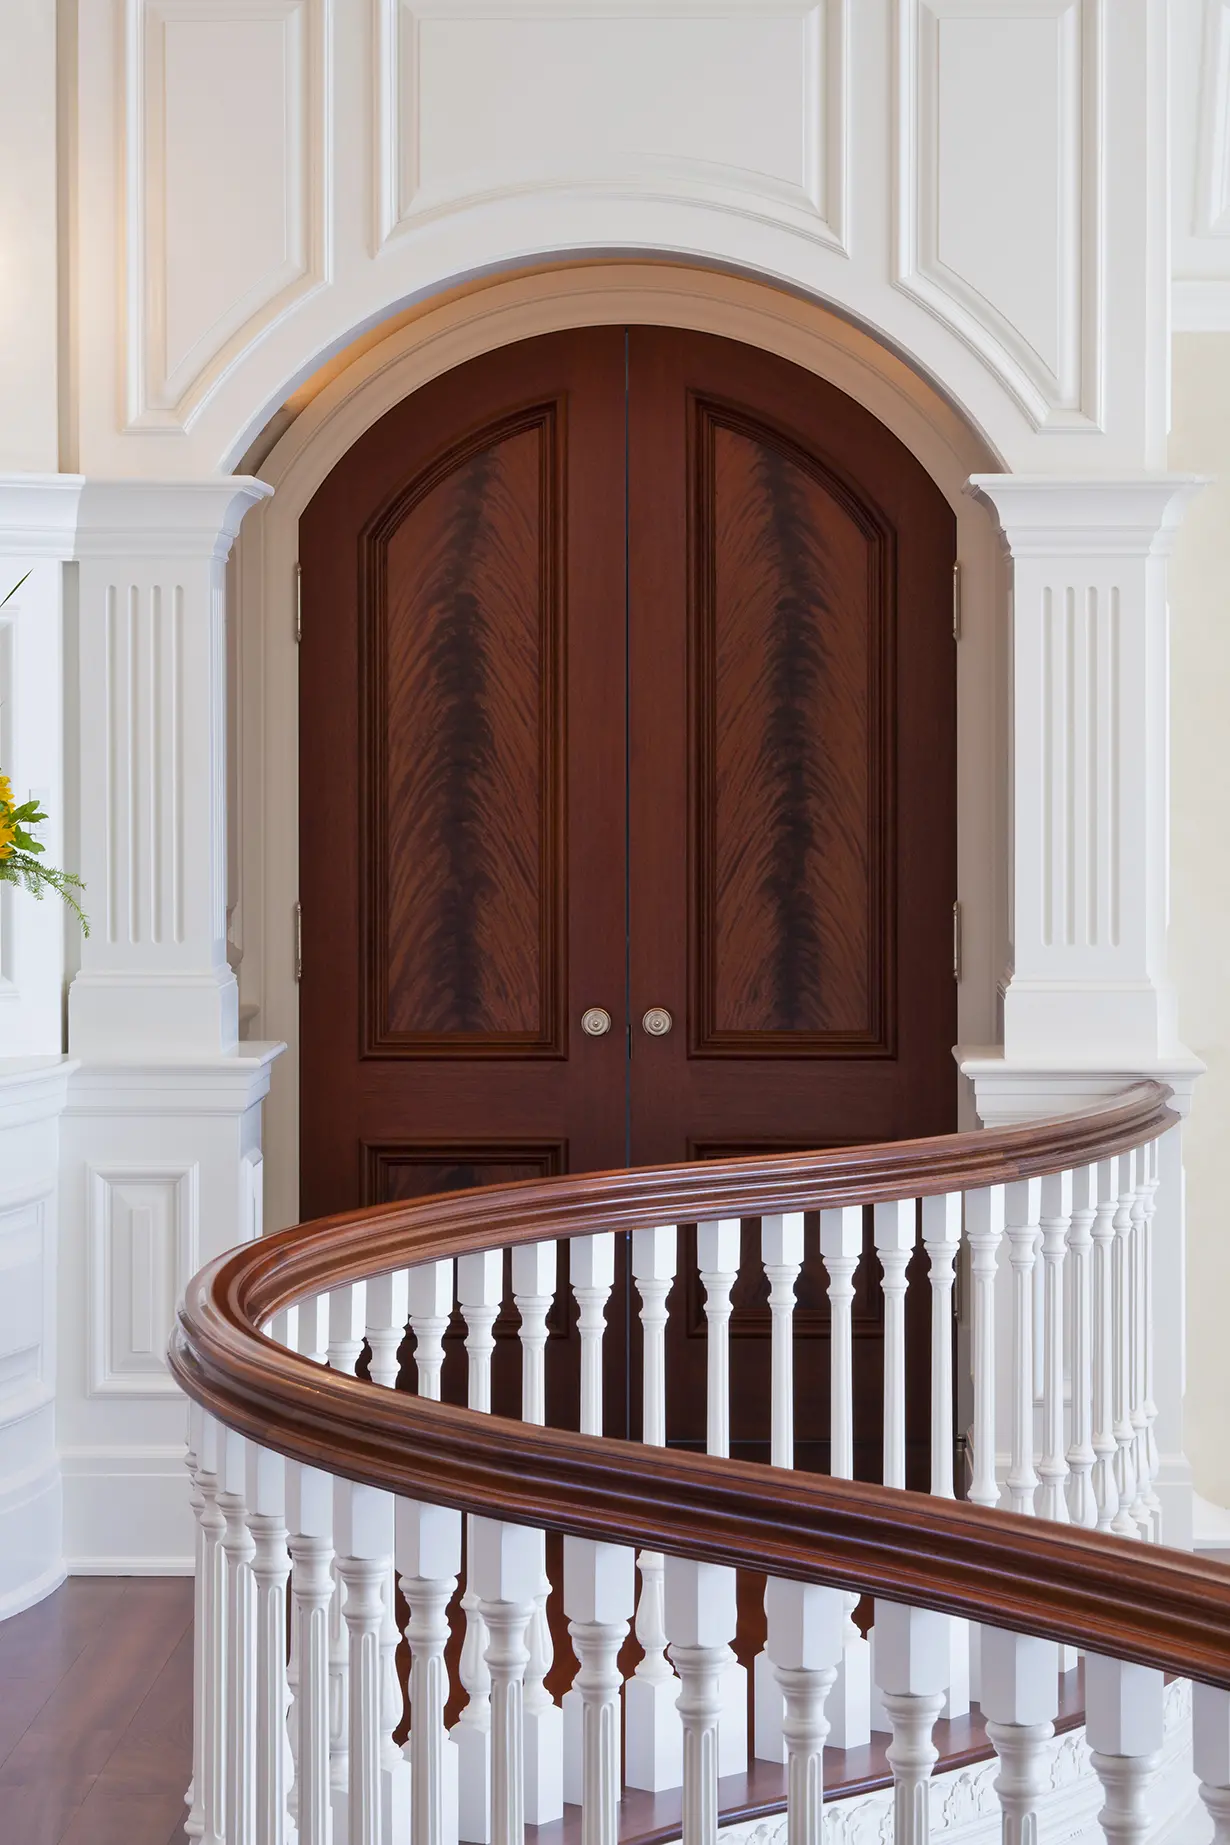 View of doorway and detailed moldings from stairs